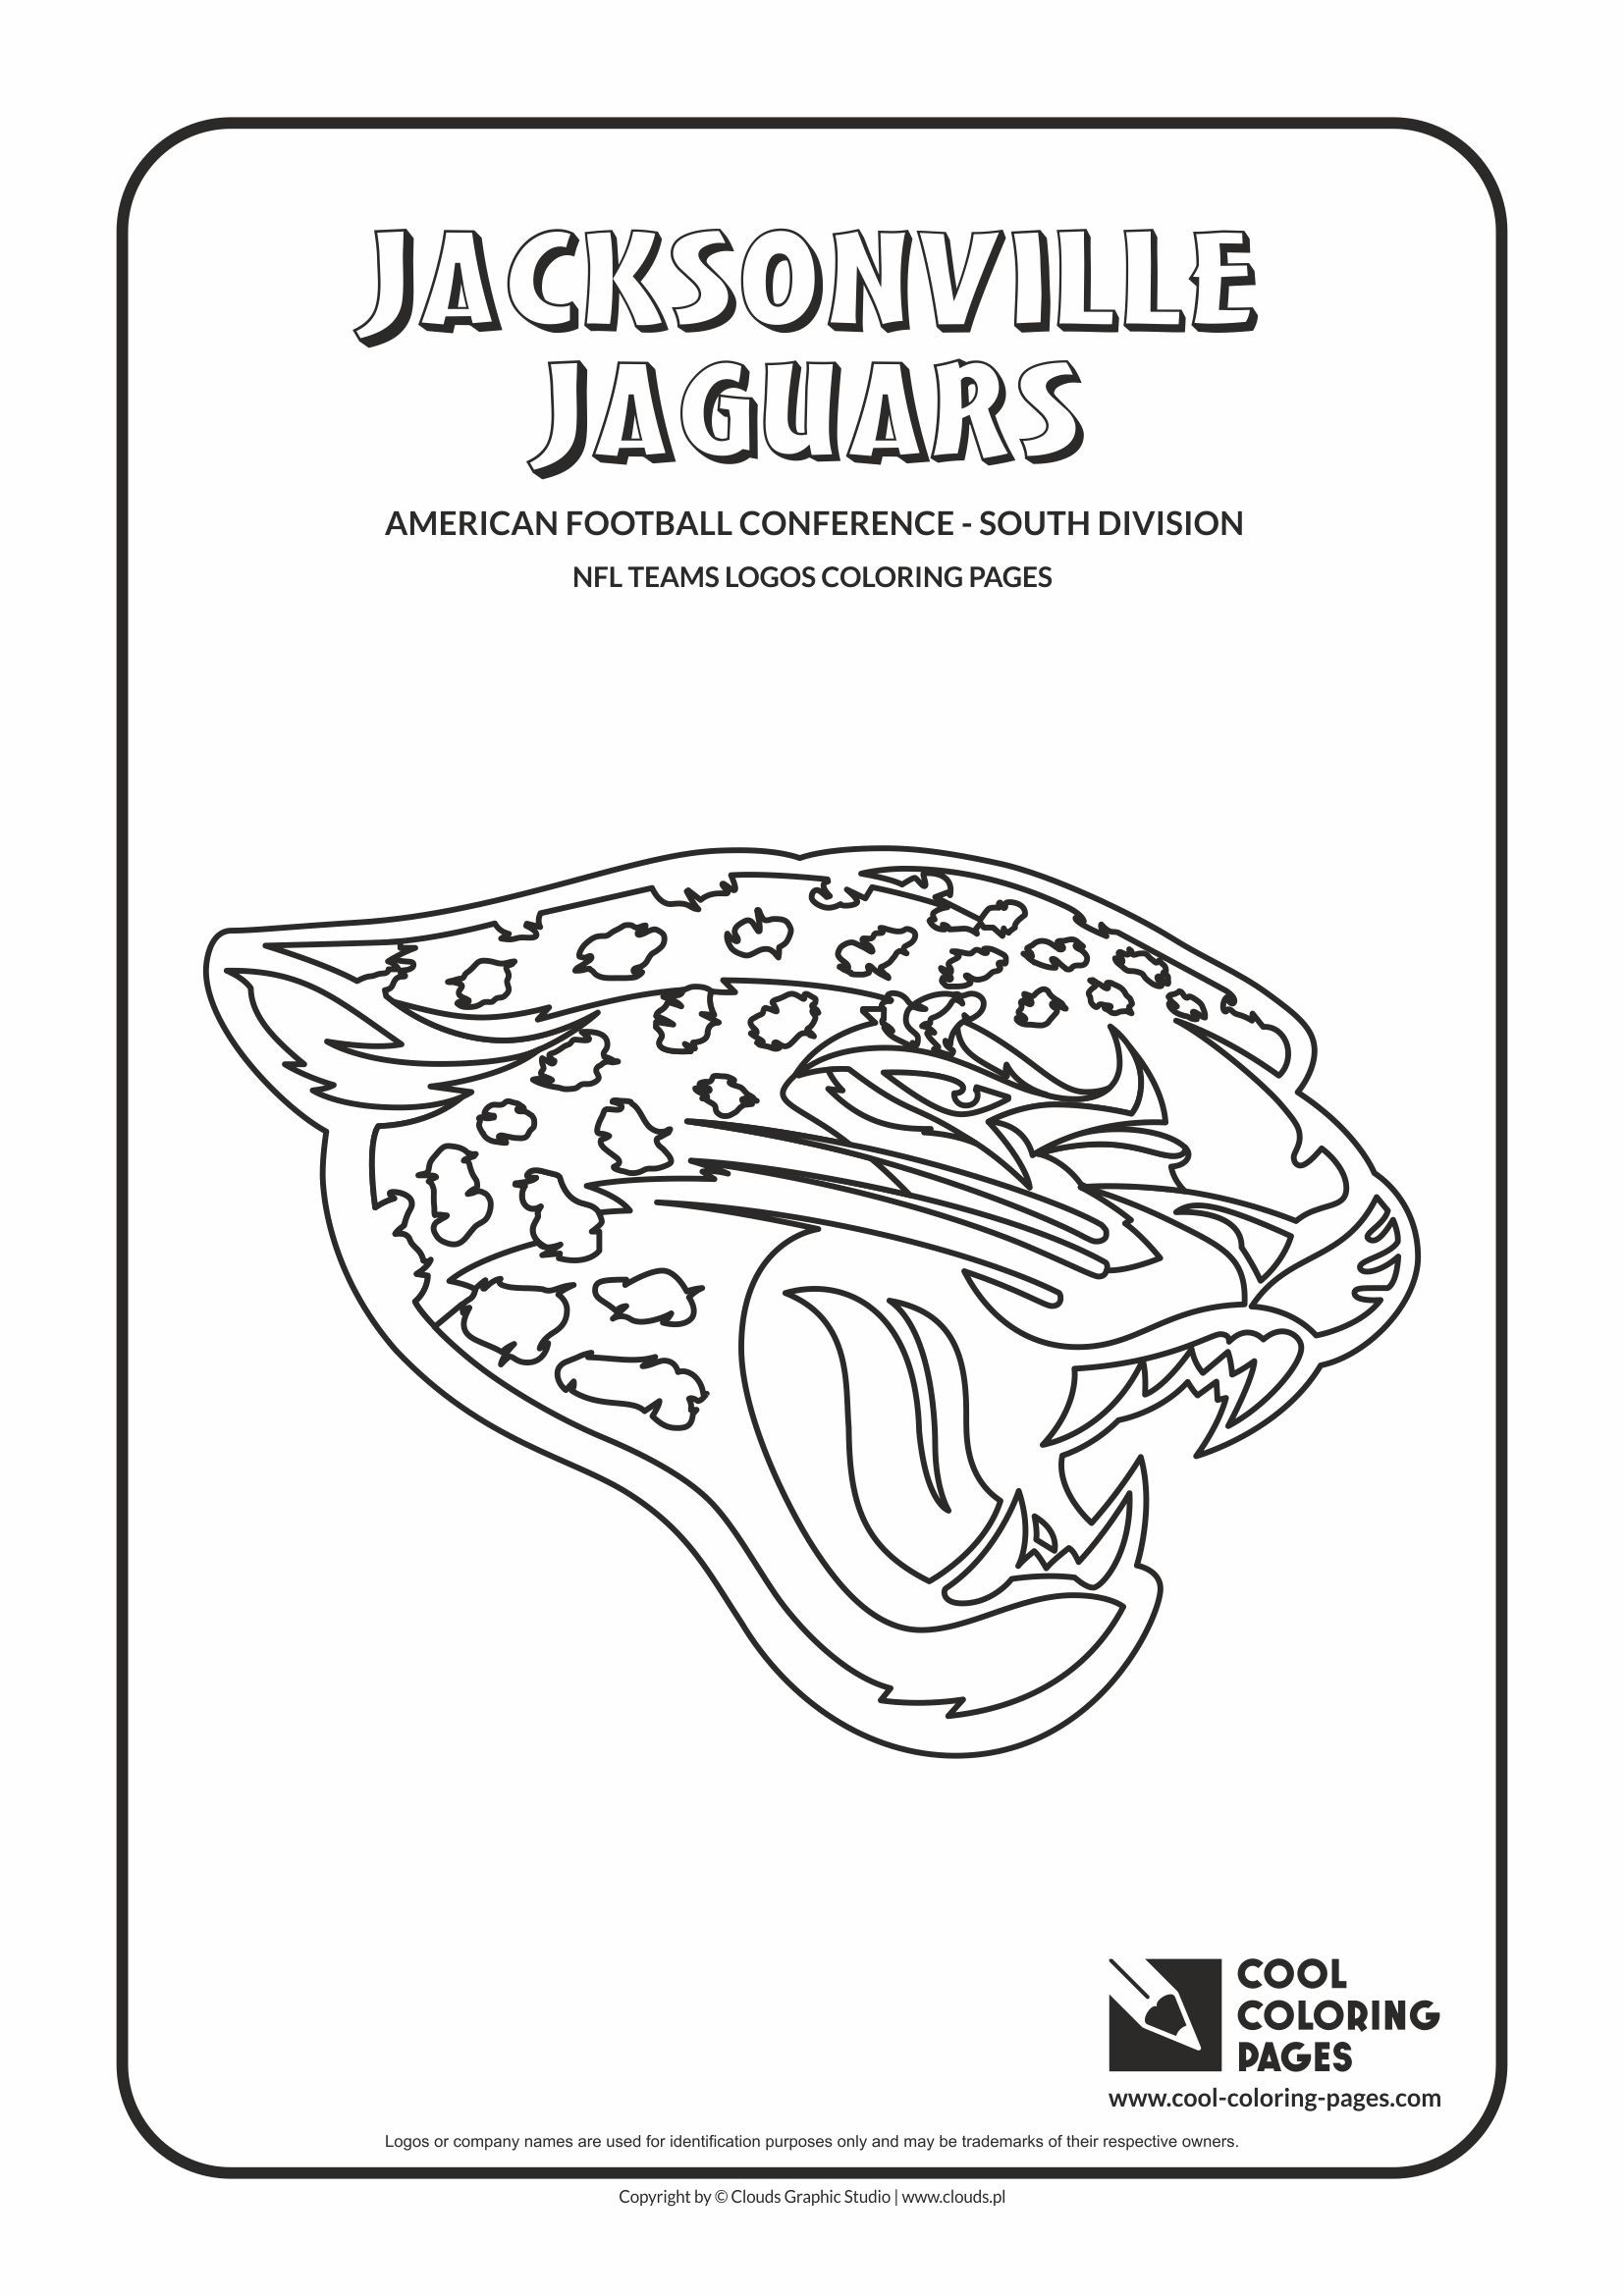 Nfl Logos Coloring Pages
 Cool Coloring Pages NFL teams logos coloring pages Cool